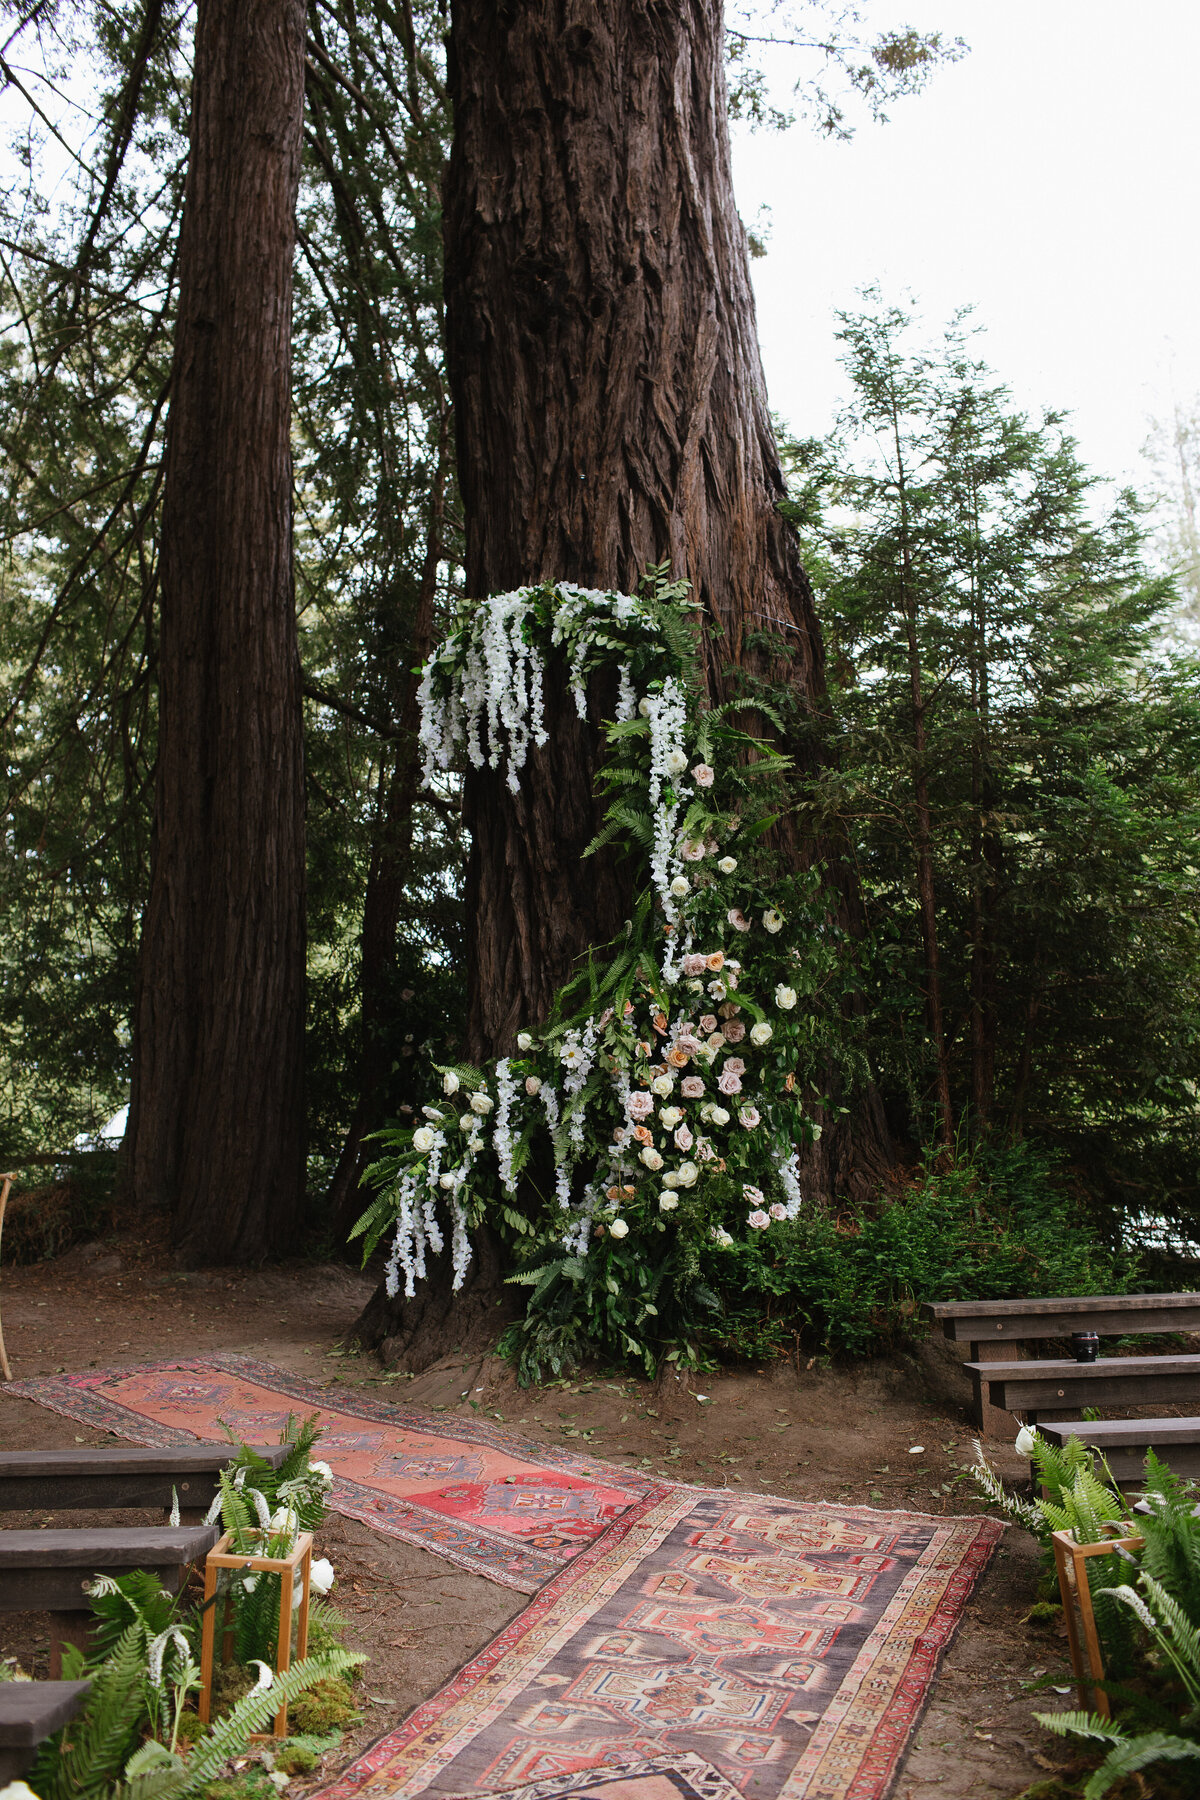 Draping Flowers on a Redwood Tree  for a wedding ceremony